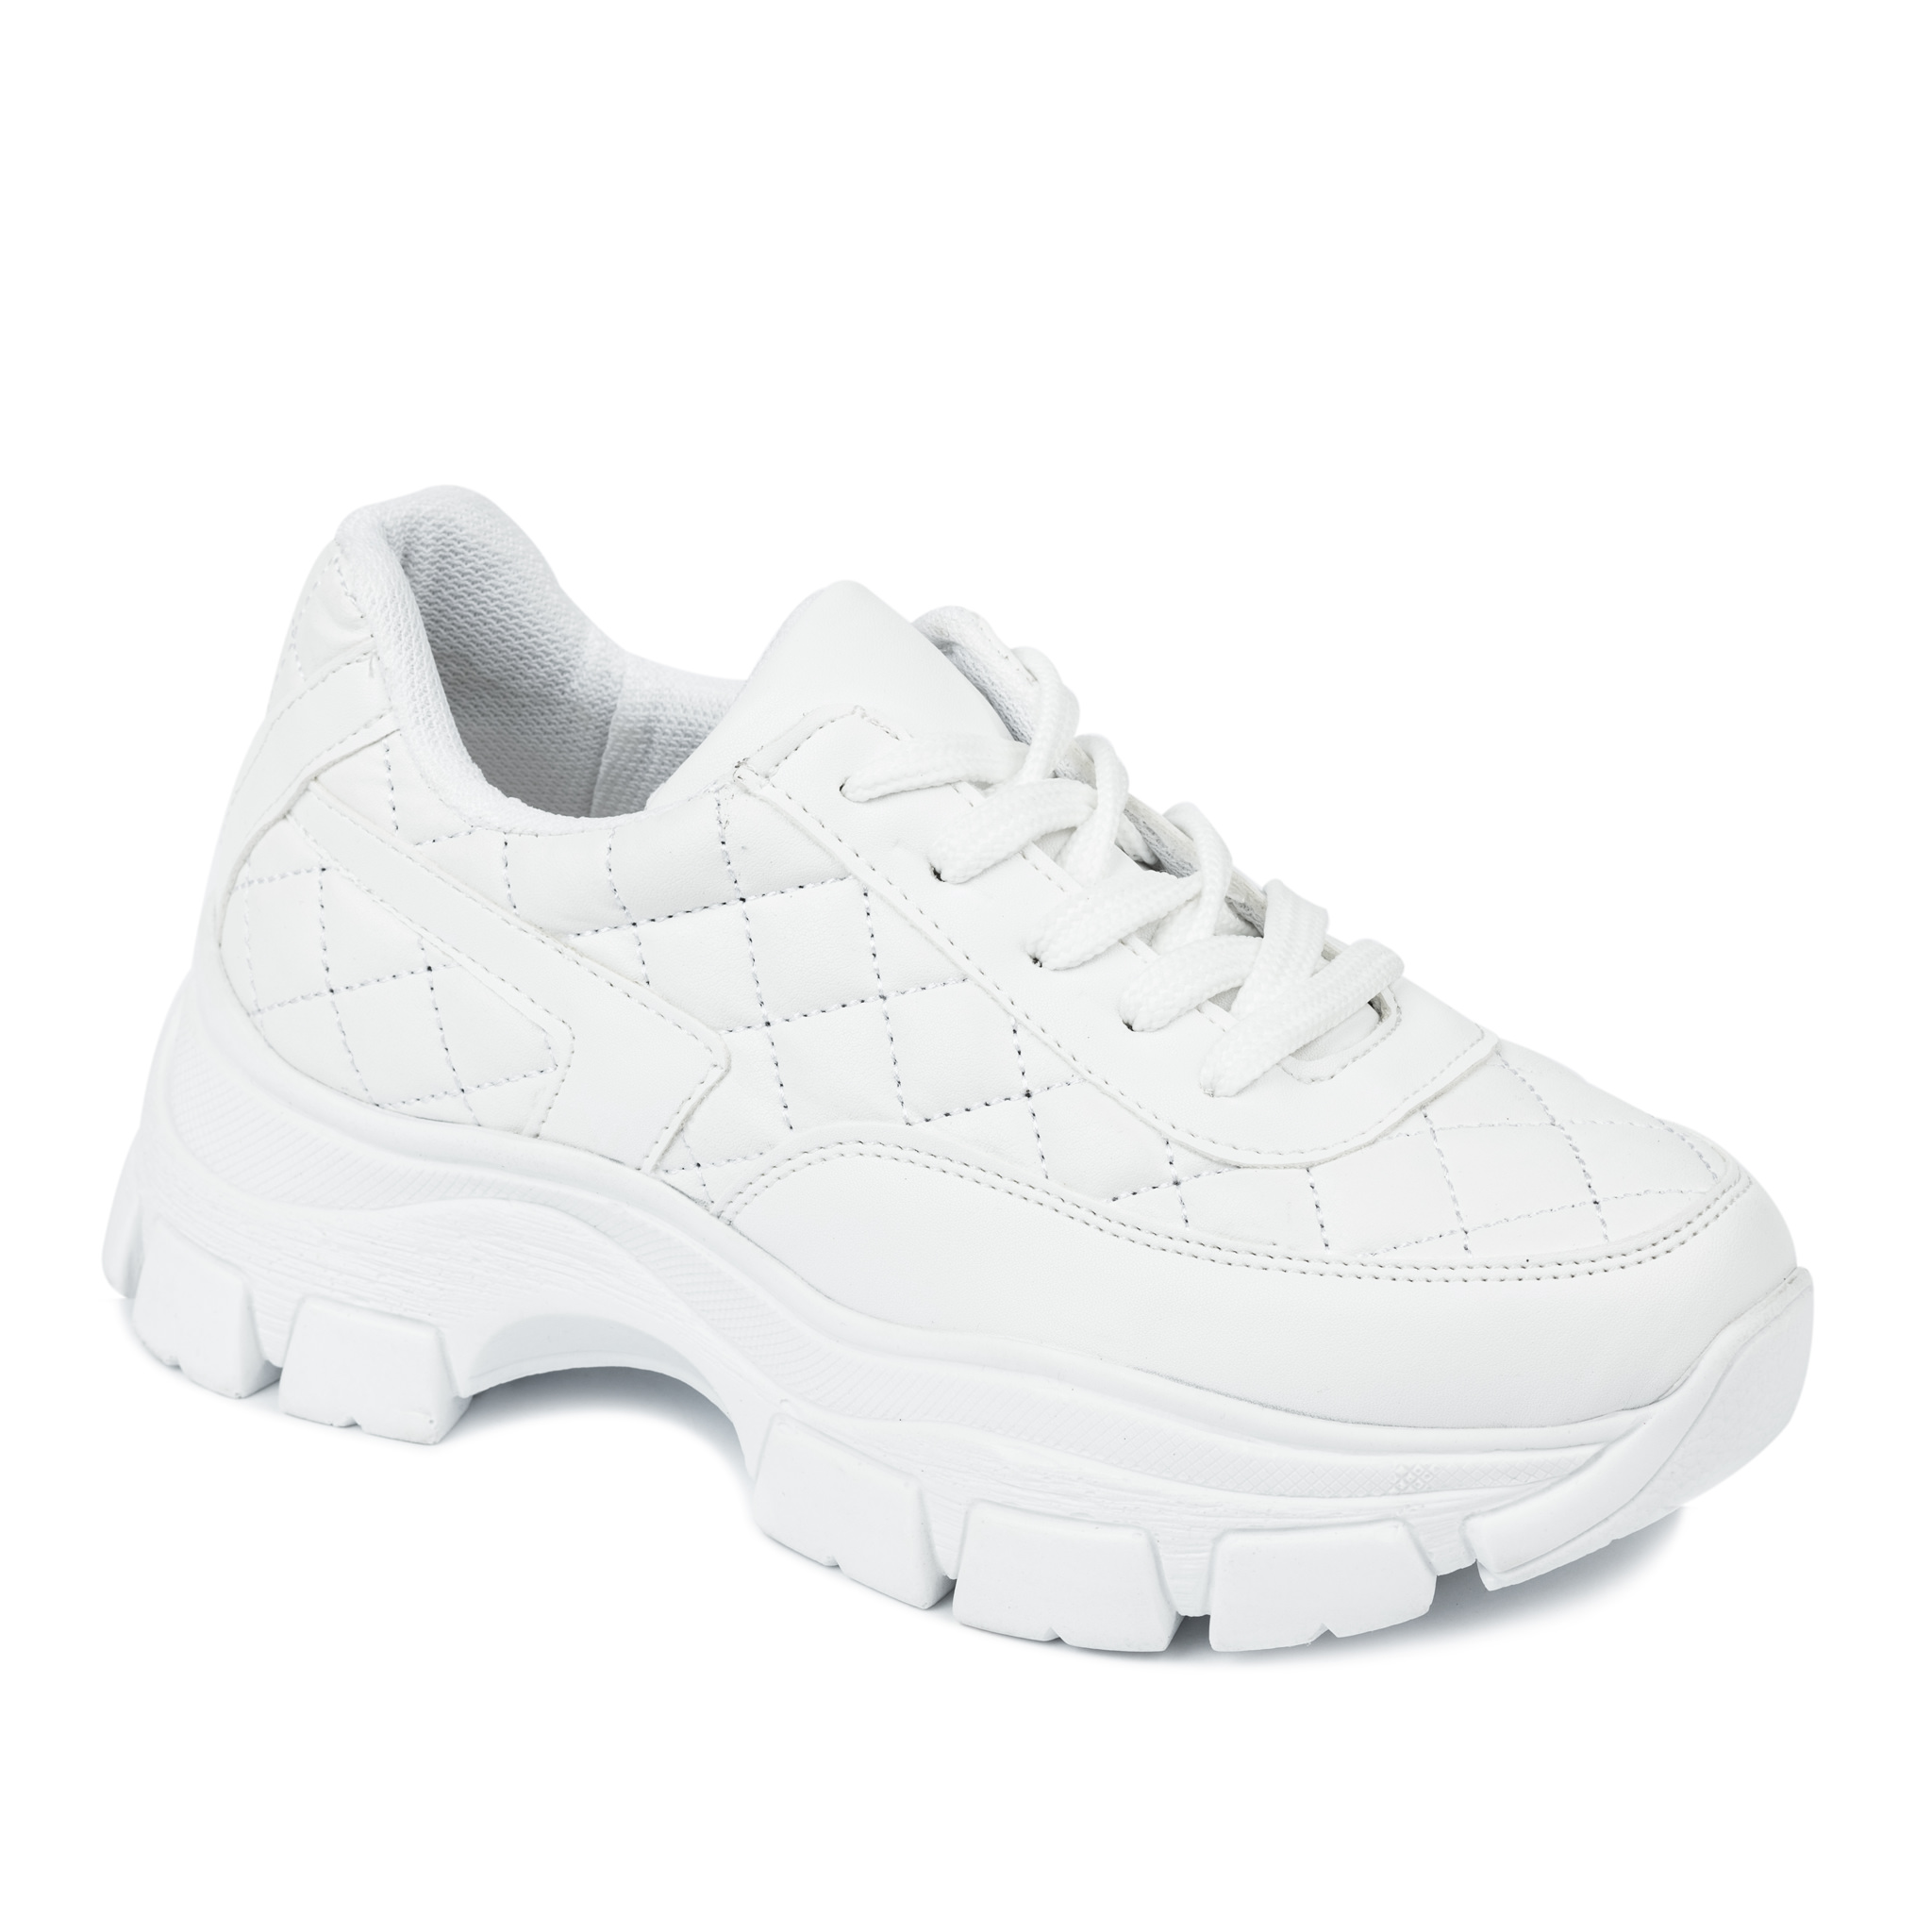 SAW LACE UP SNEAKERS - WHITE